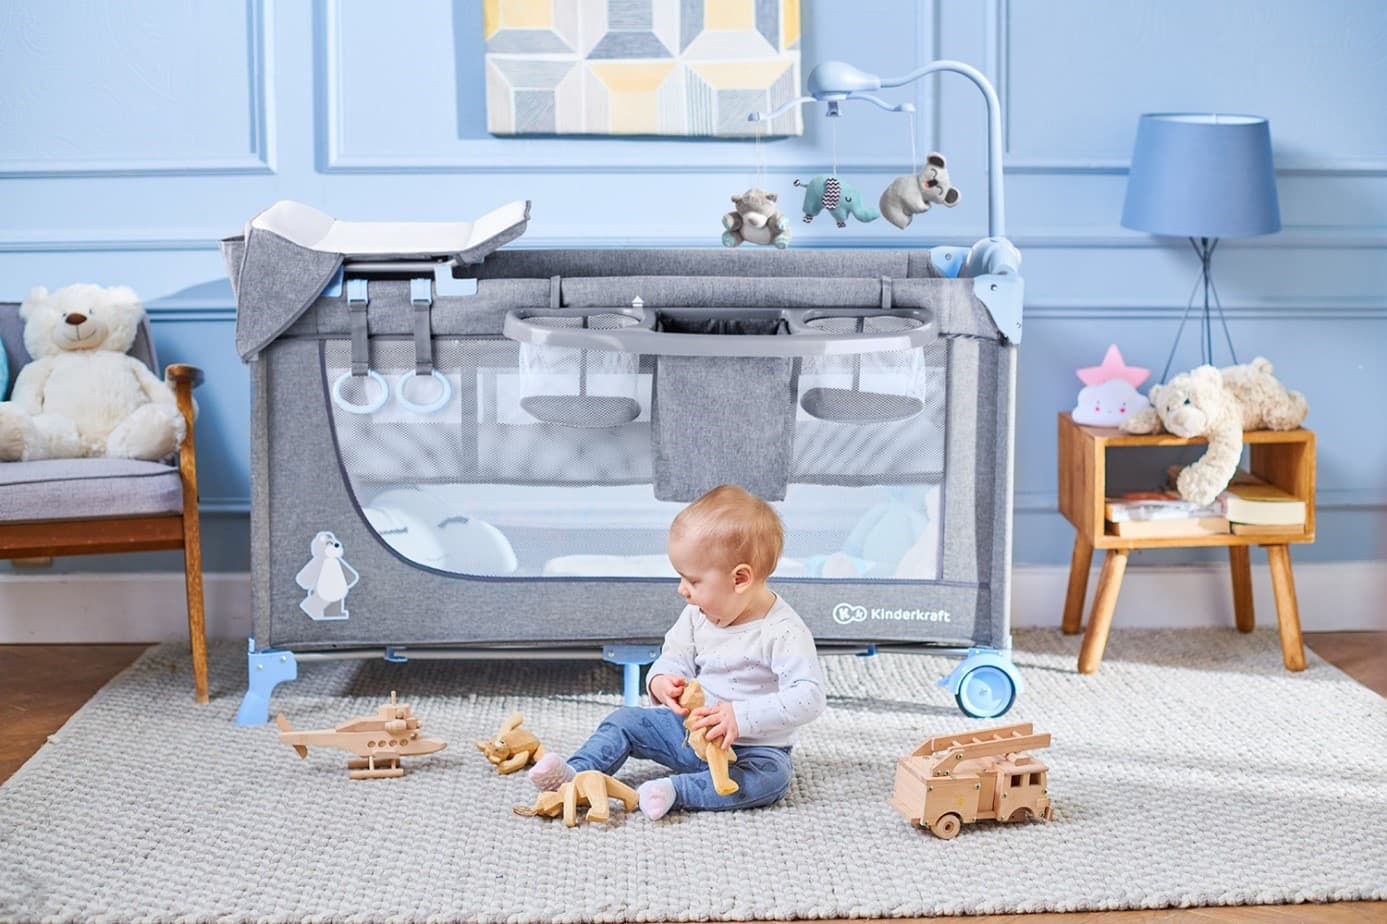 A small child playing on the carpet with wooden toys next to the JOY travel cot in the blue children's room